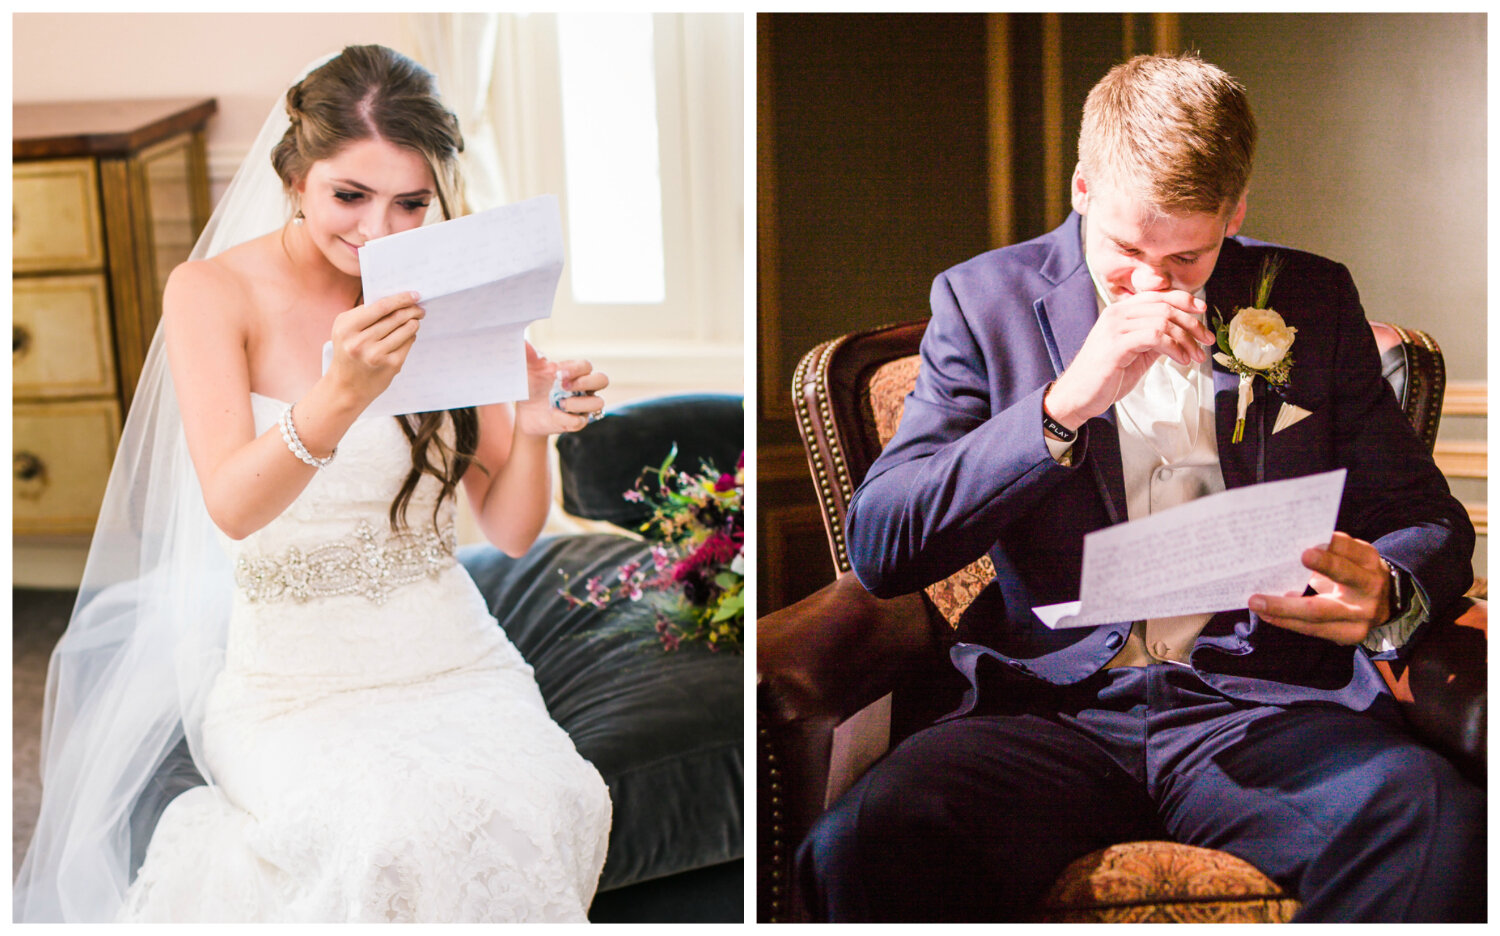  Bride and groom reading letters.&nbsp;Photographed by JMGant Photography, Denver Colorado wedding photographer.&nbsp; 